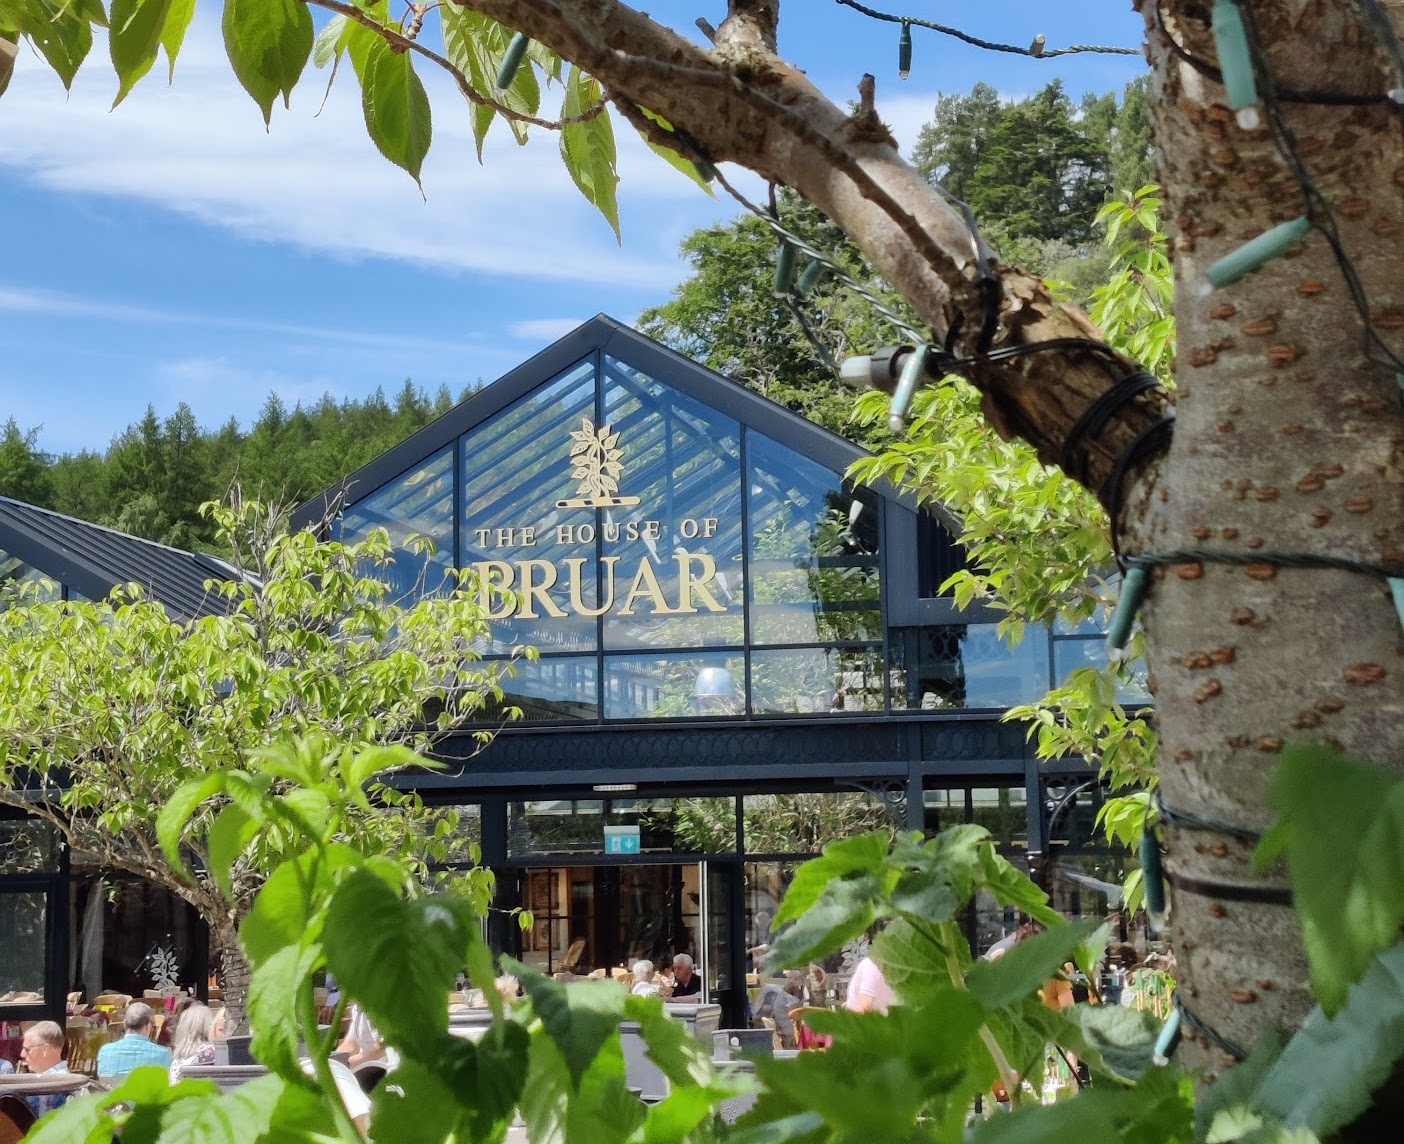 Customer focus pays off as House of Bruar earnings top £10m